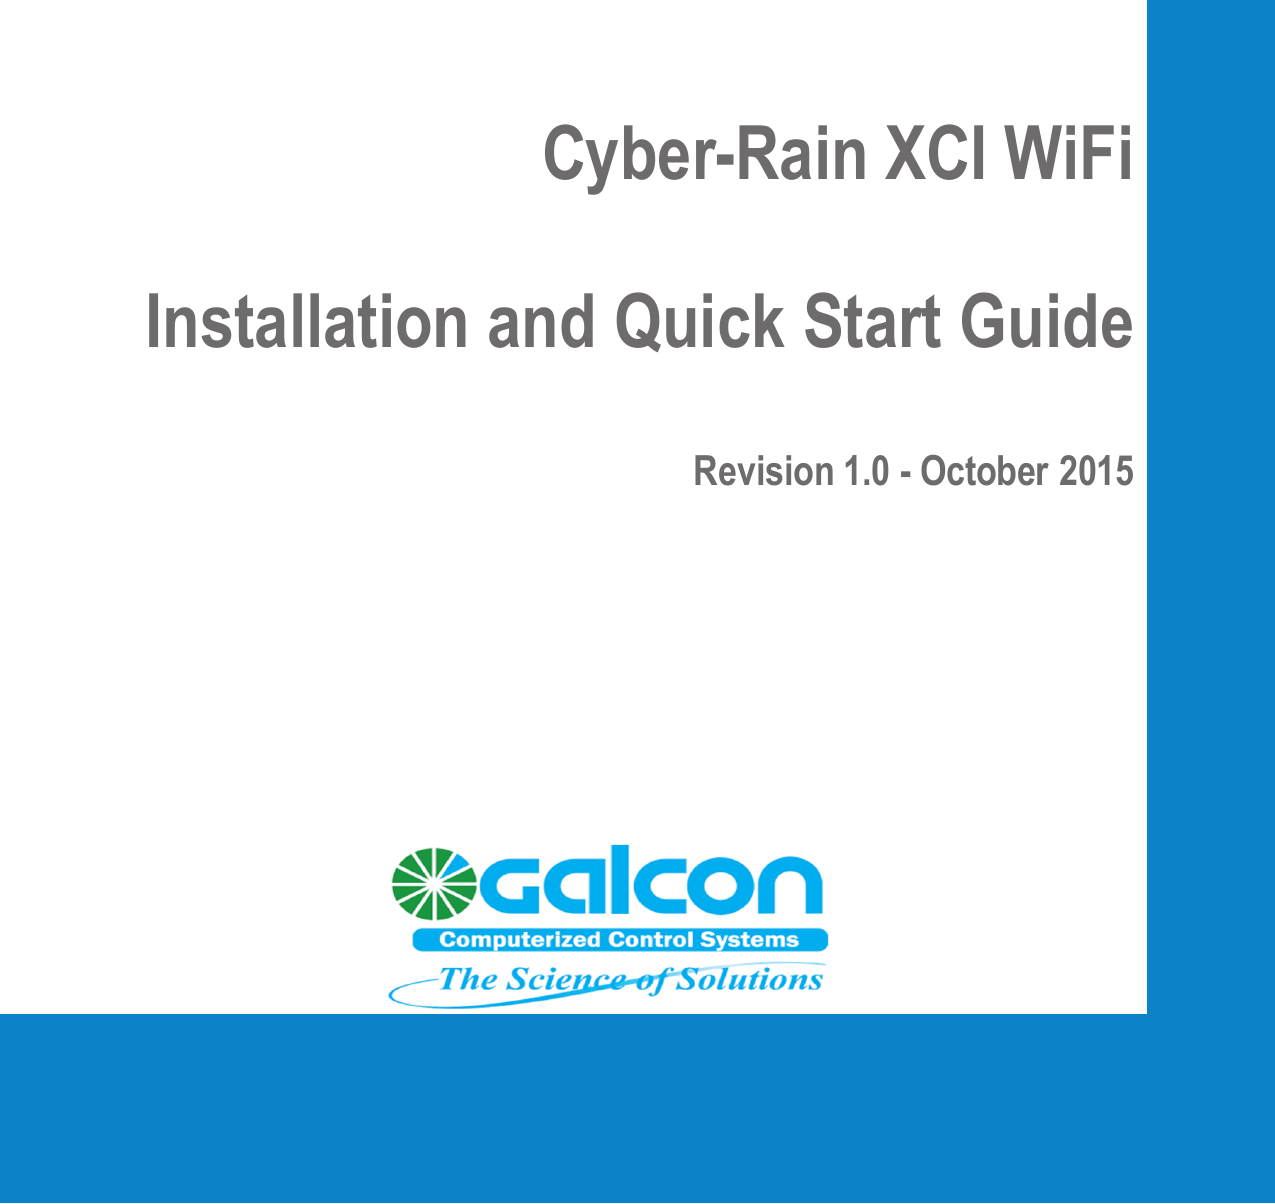 Cyber-Rain XCI WiFiInstallation and Quick Start GuideRevision 1.0 - October 2015